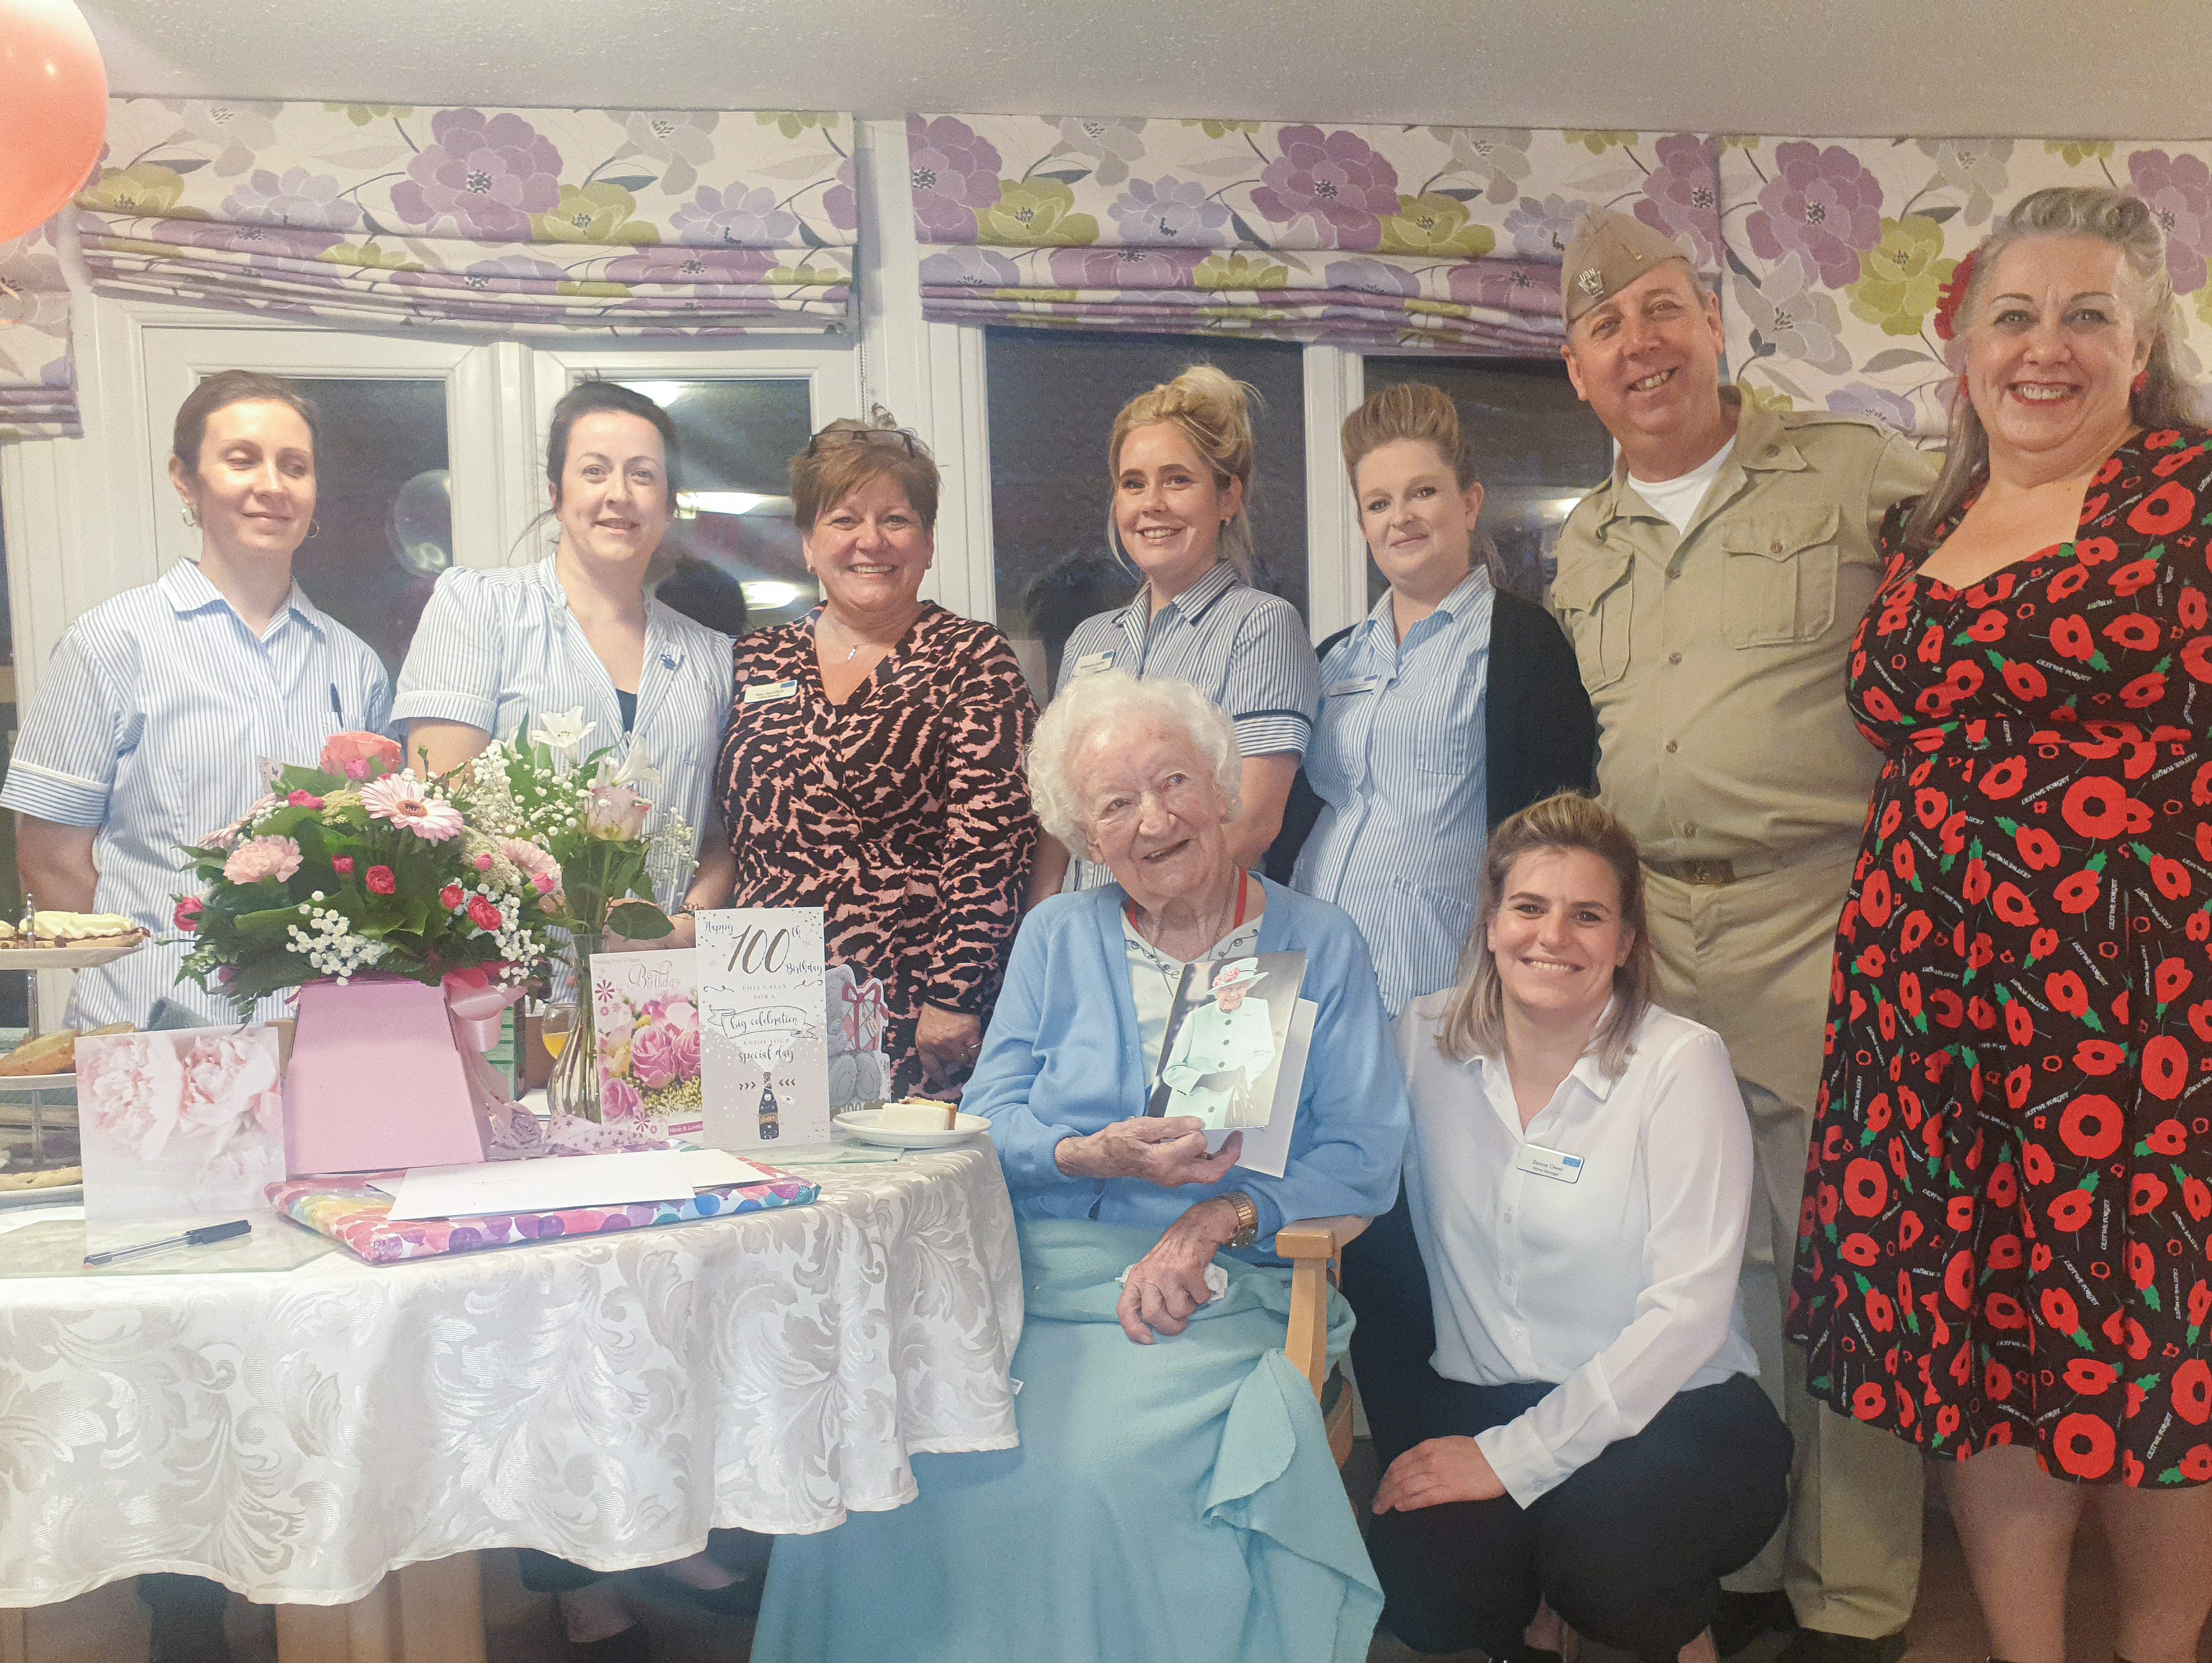 New Copford Place care home staff and Air Raid Jive posing with Marjorie at her birthday party